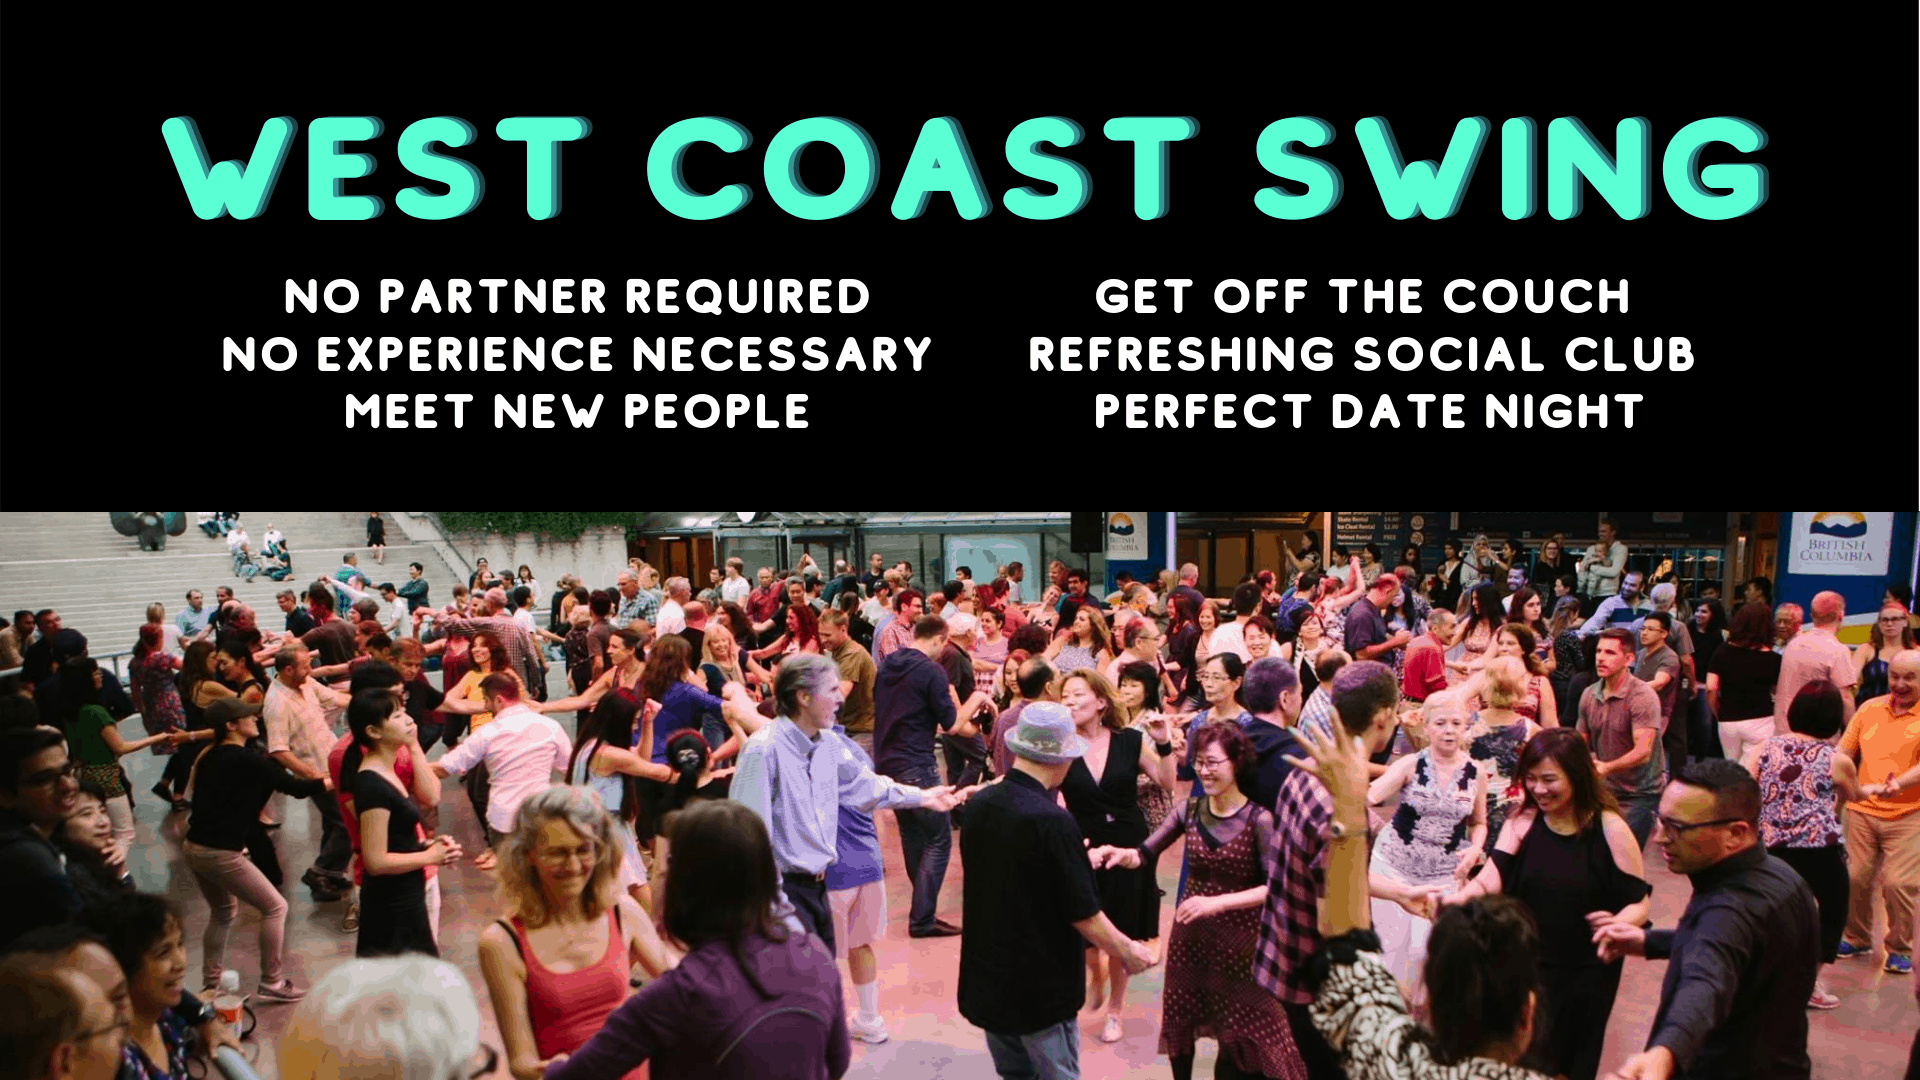 About West Coast Swing